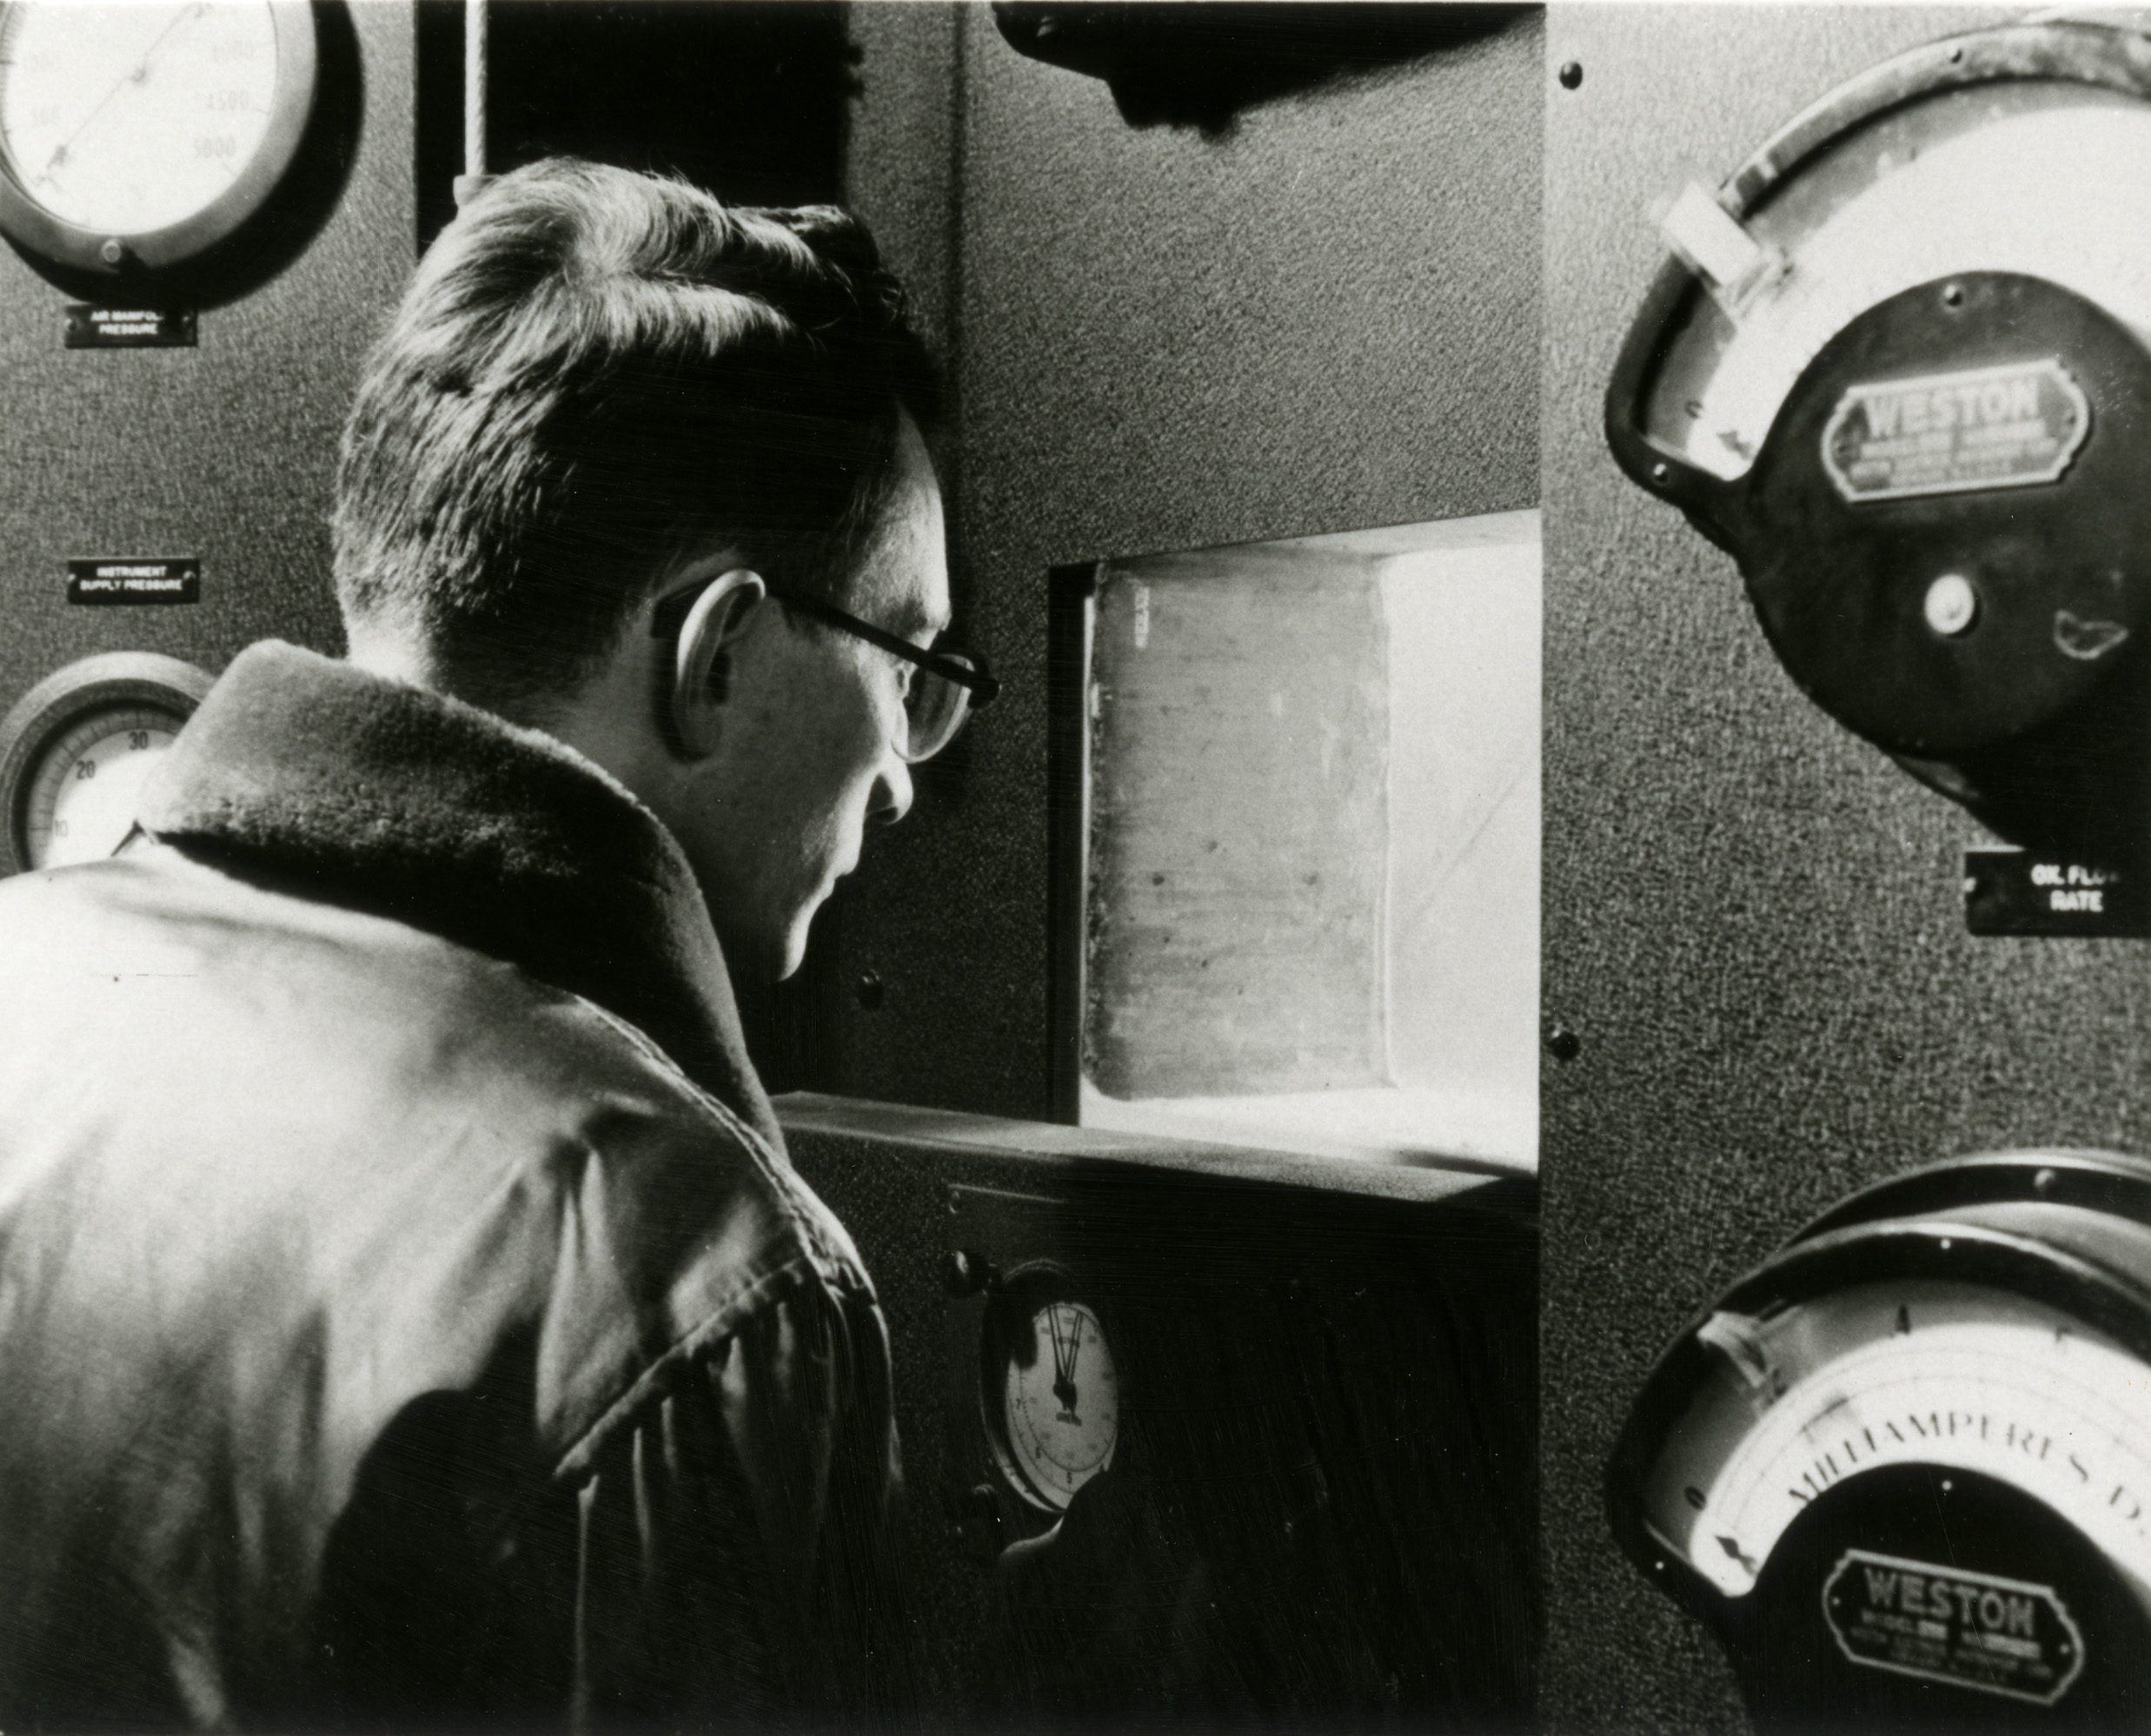 Graduate student Clair Beighley at the “periscopic window” (1951).